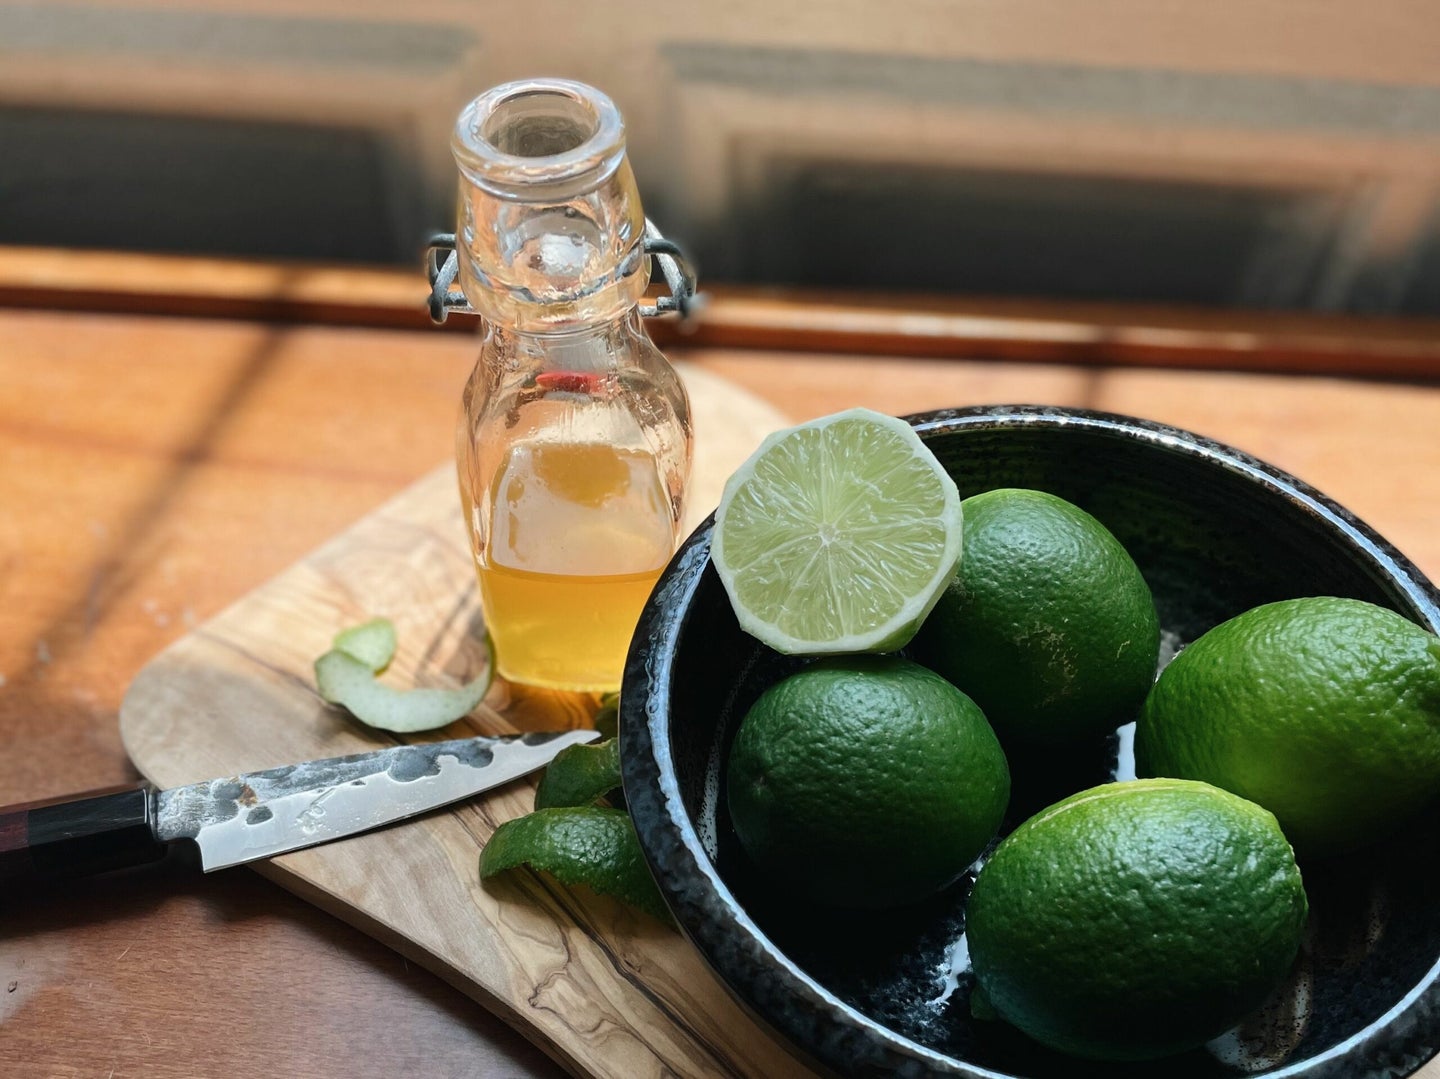 Lime Cordial Céline Bossart with Limes in Bowl